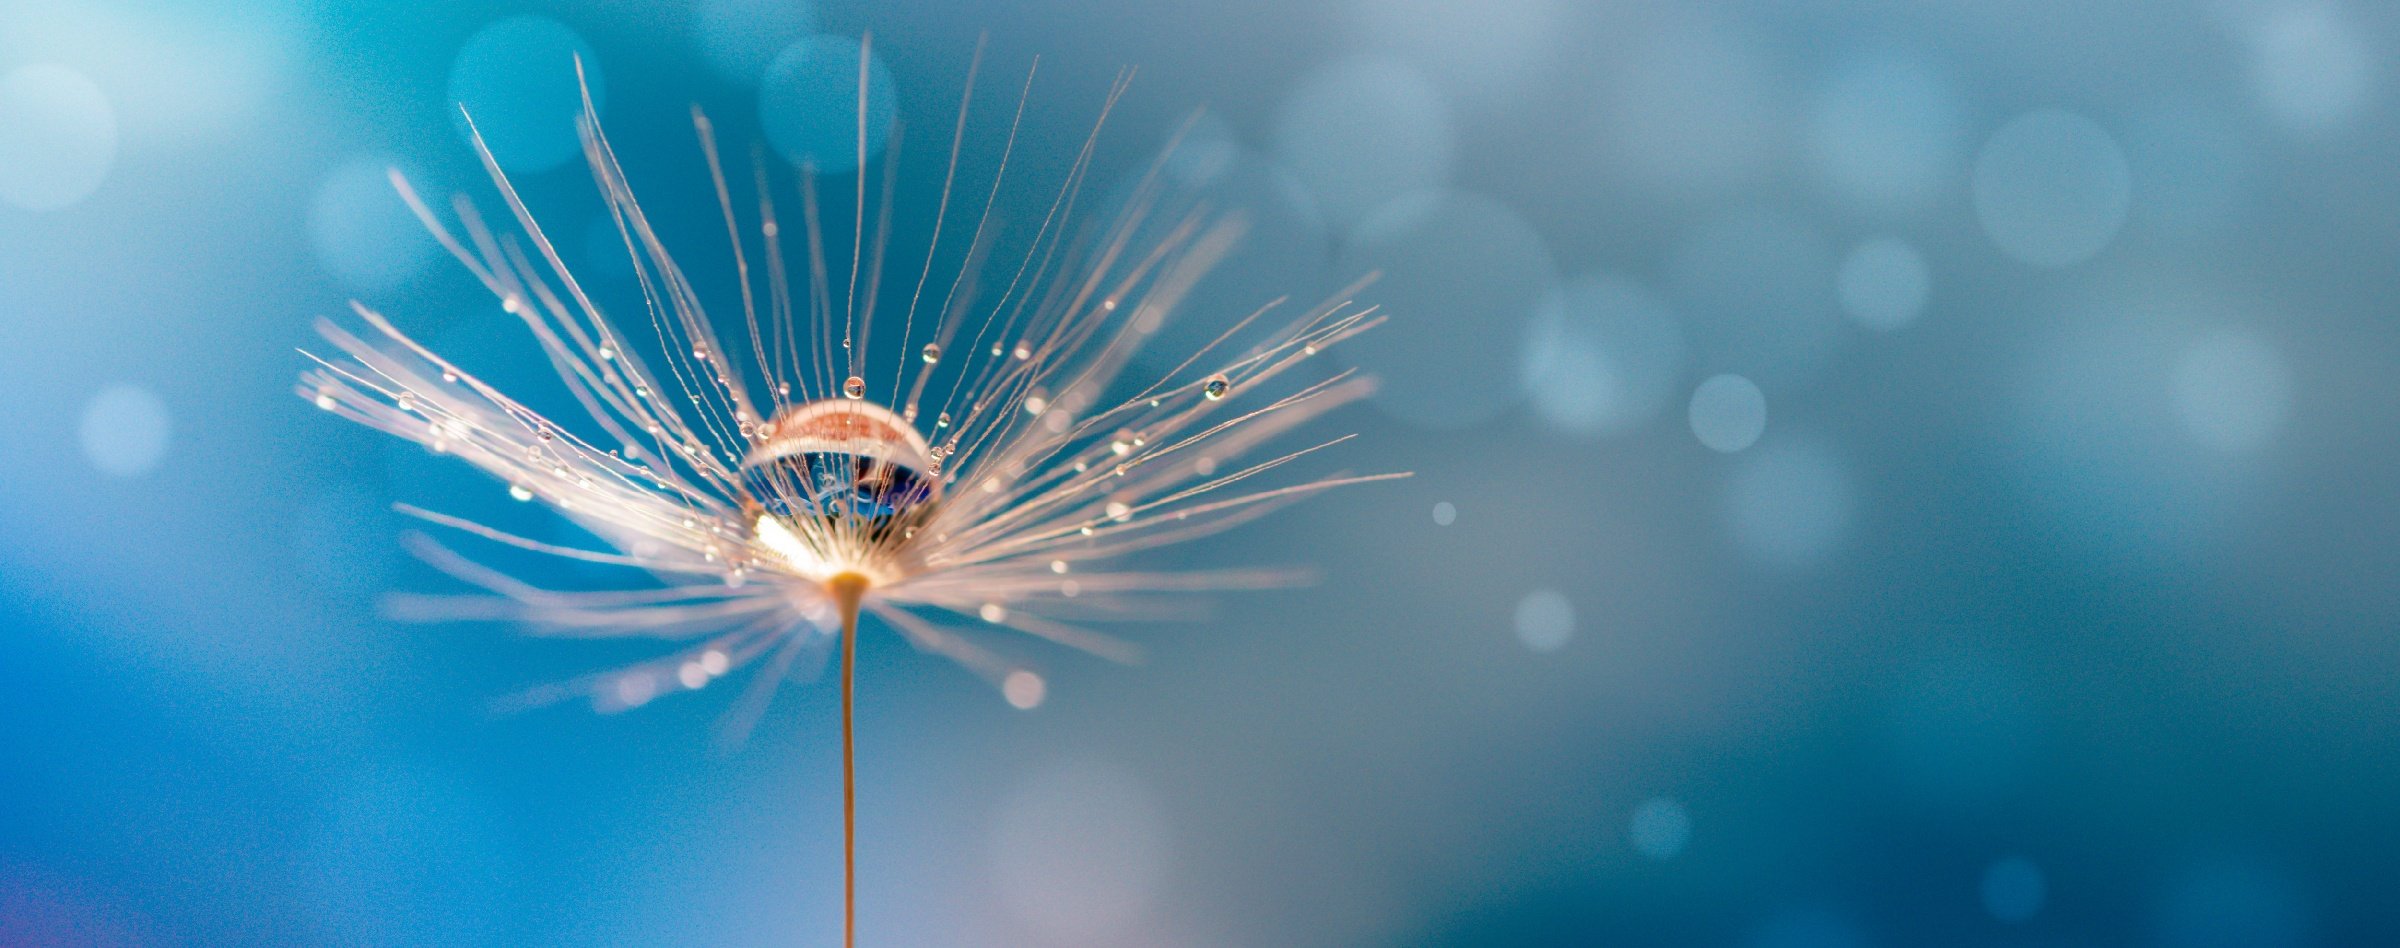 abstract blurred nature dandelion water drop